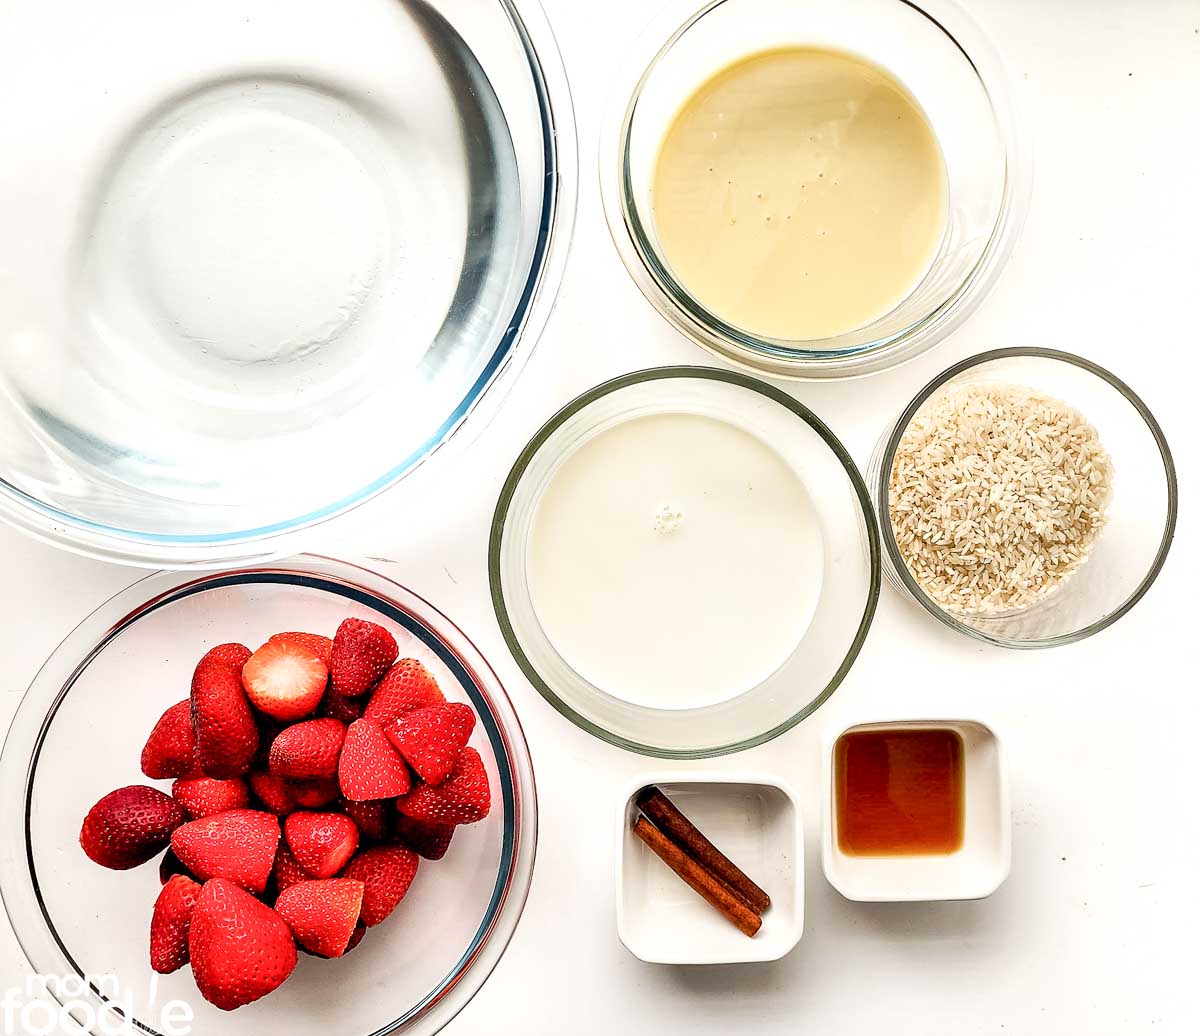 Ingredients for horchata with strawberries